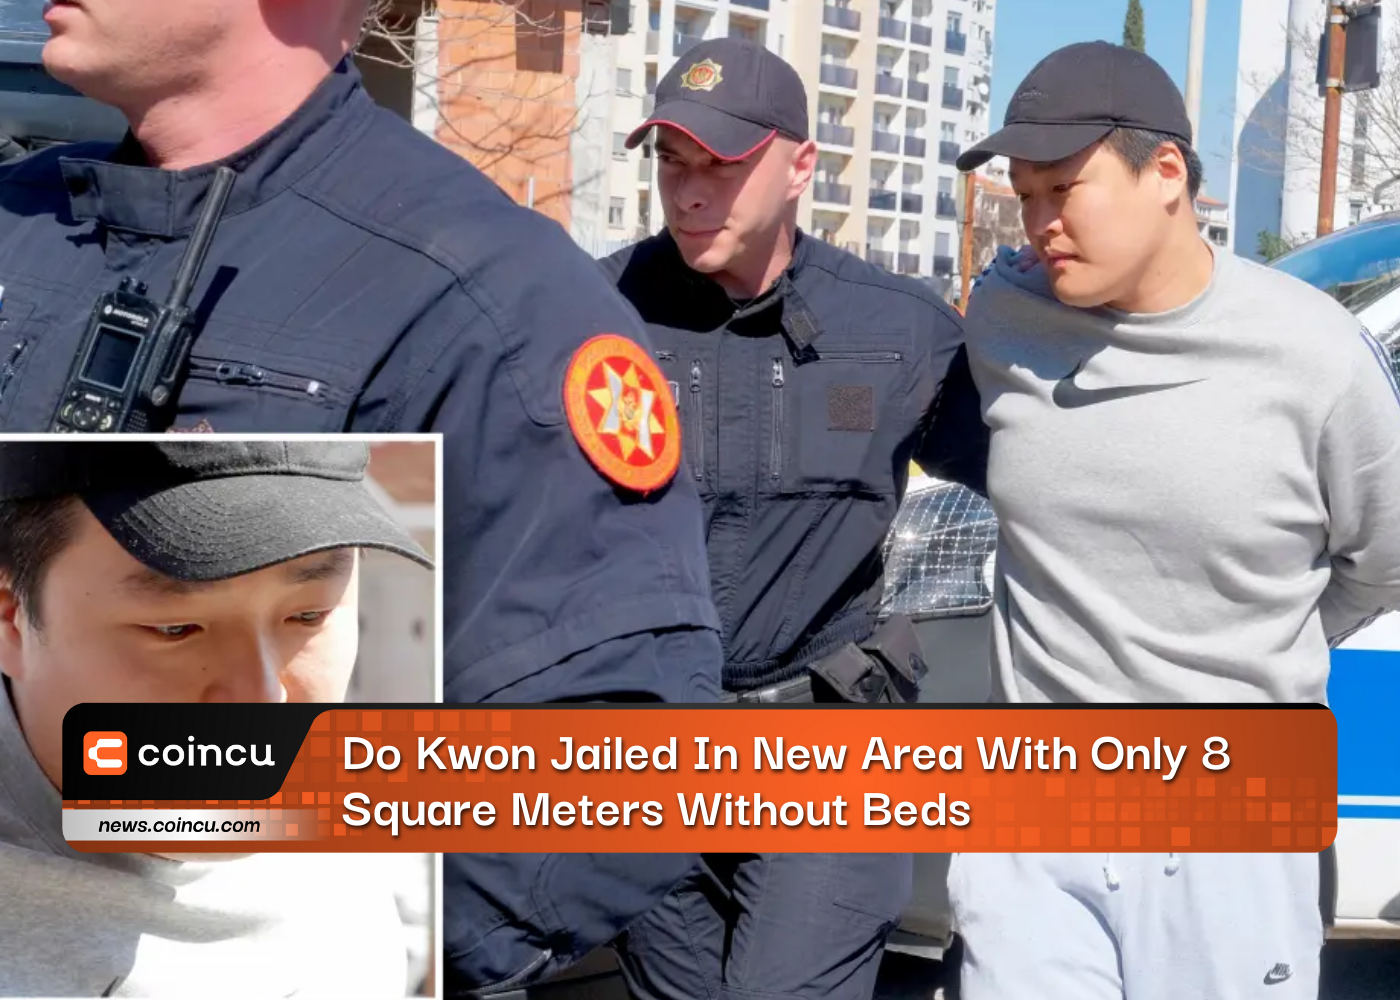 Do Kwon Jailed In New Area With Only 8 Square Meters Without Beds